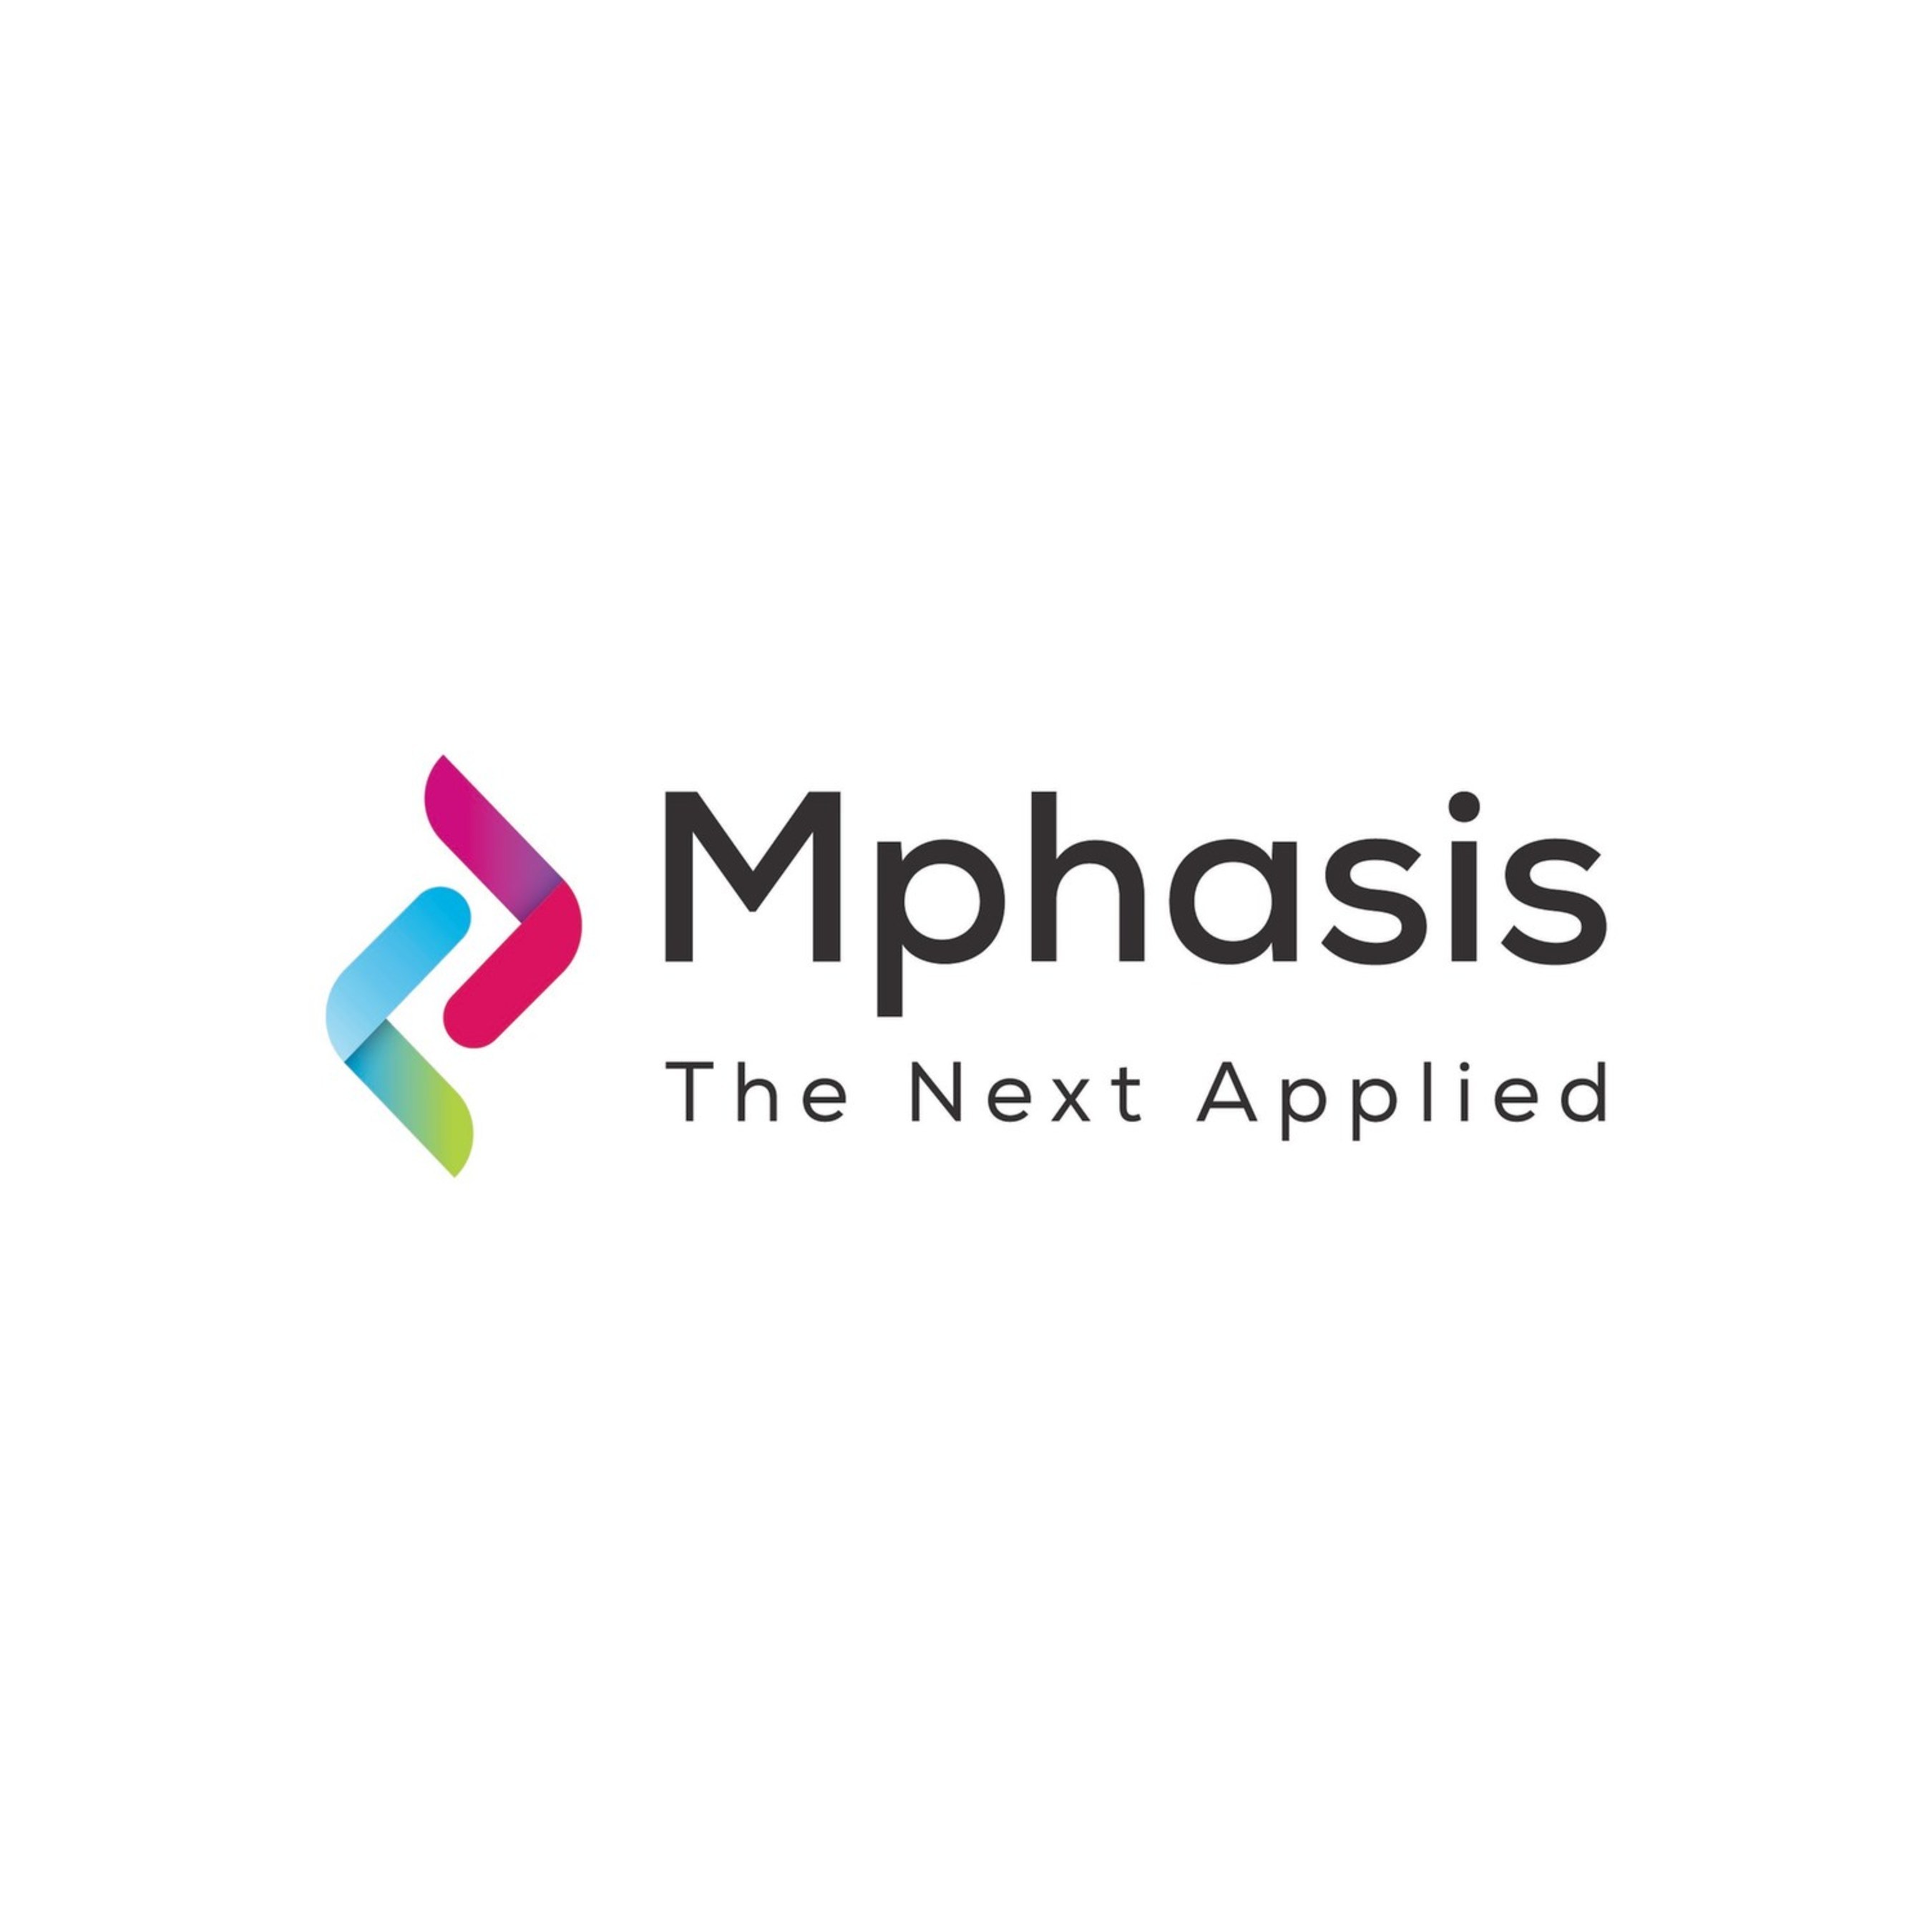 Mphasis Digital Risk leverages Mendix low-code platform to enable fast, effective digitalization for the financial services industry